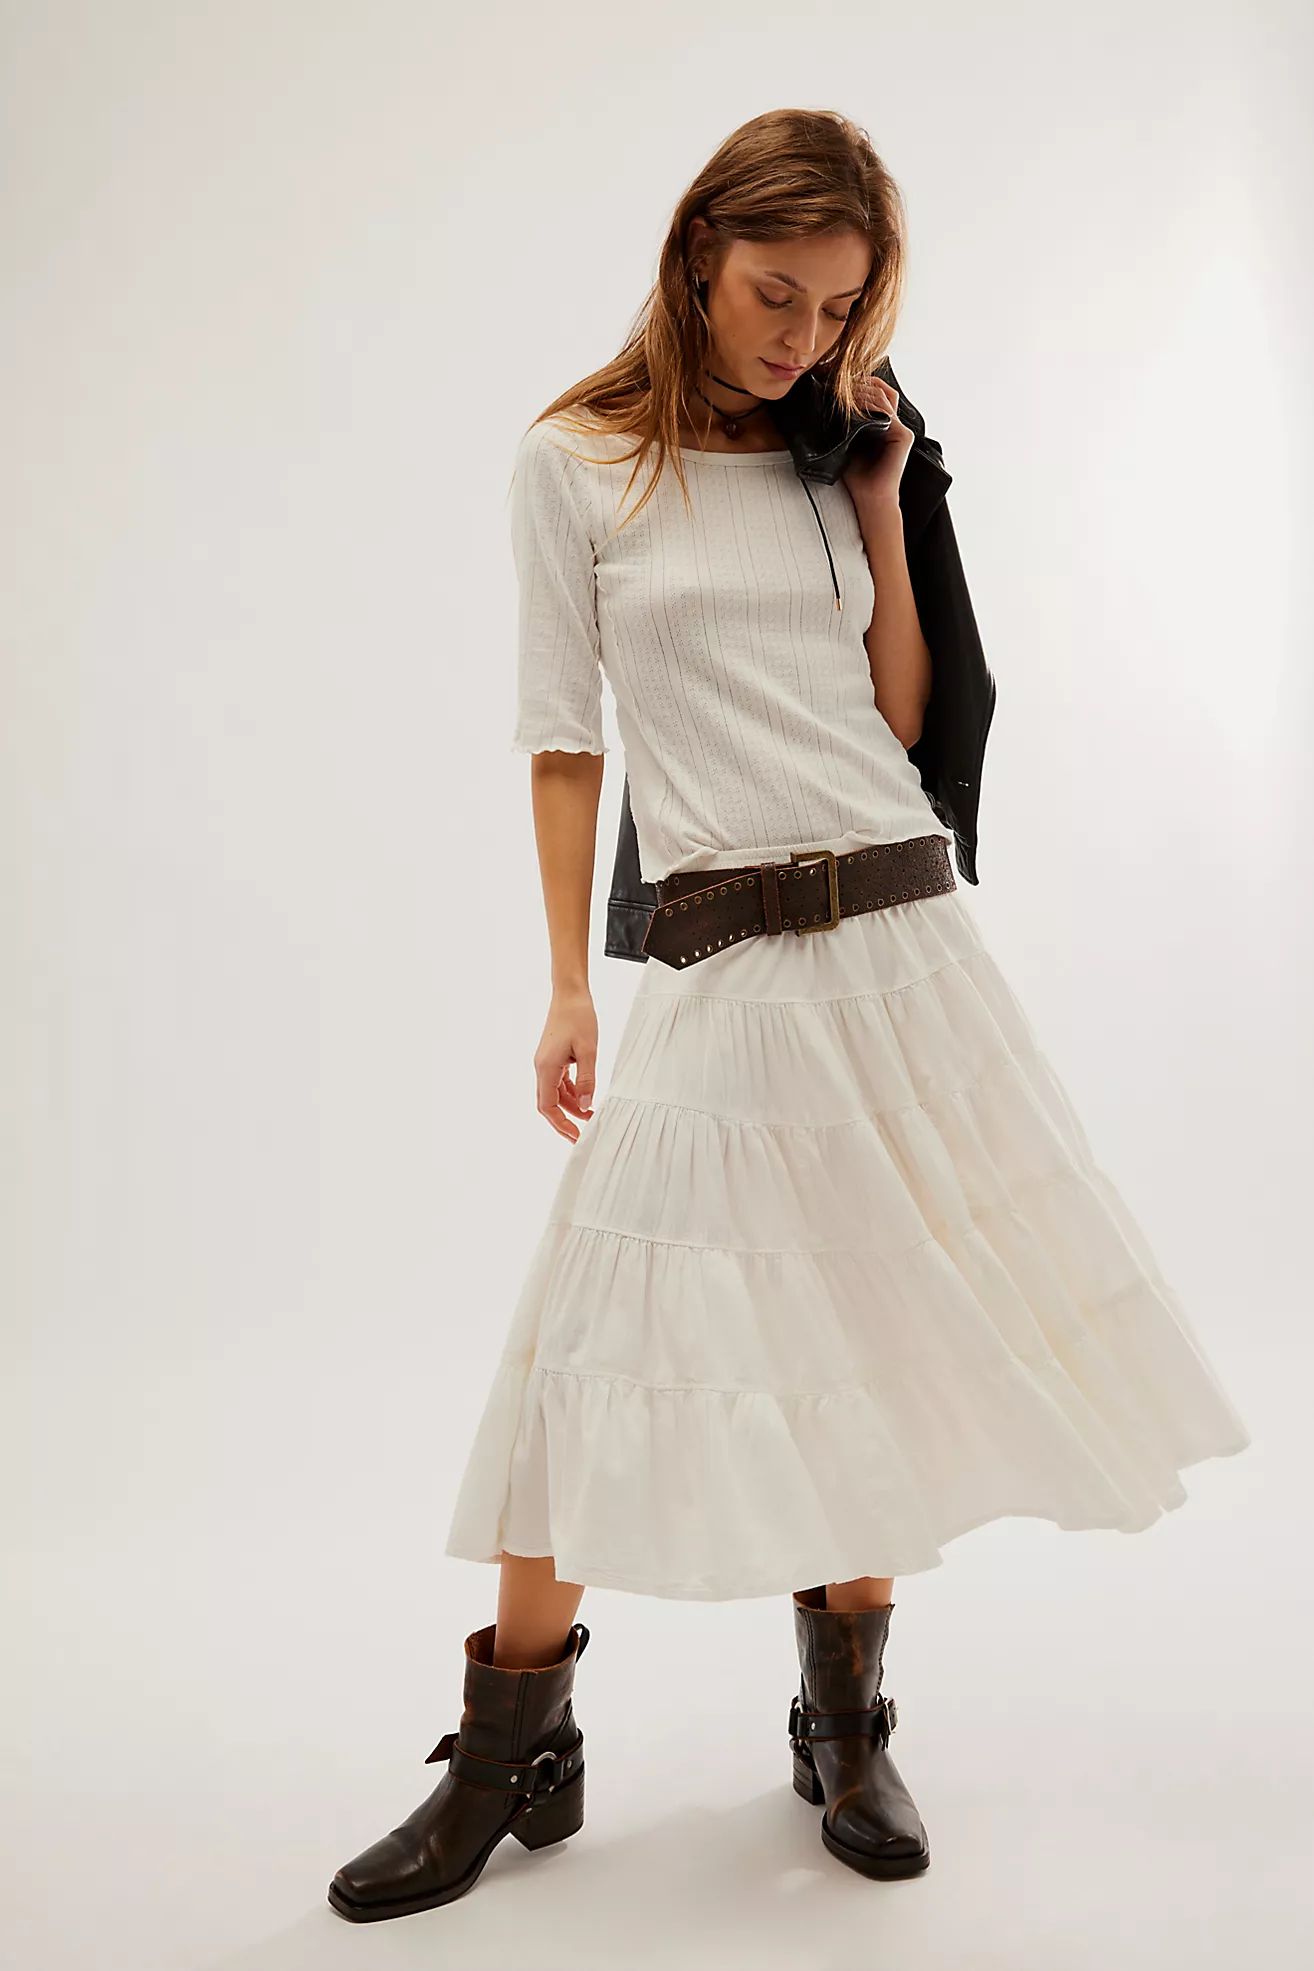 Similar Items

               
            Super Thrills Maxi Skirt
            
                ... | Free People (Global - UK&FR Excluded)